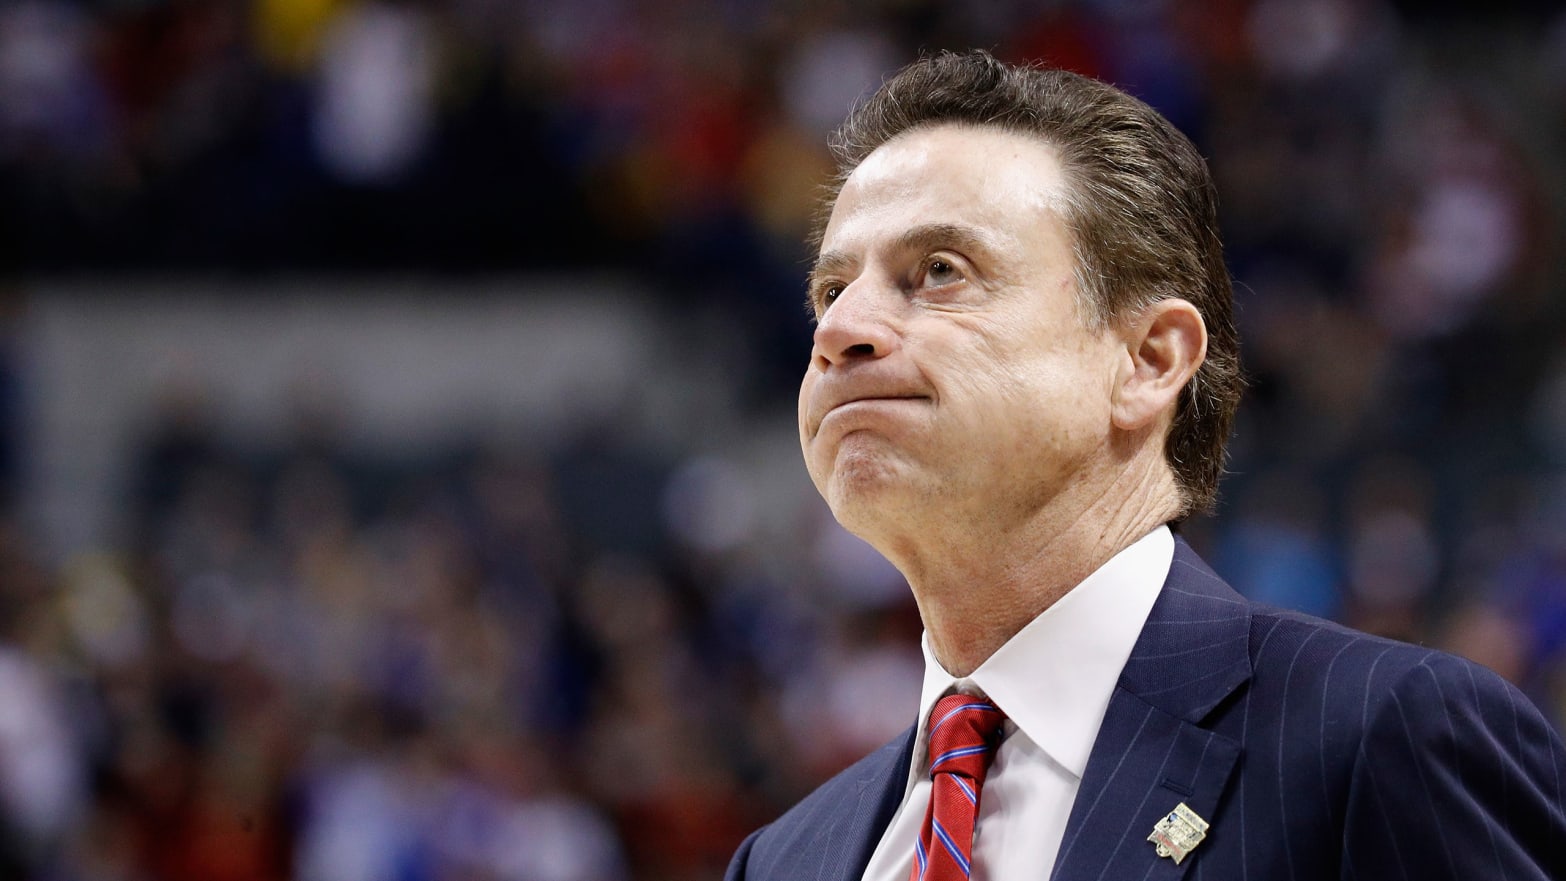 Rick Pitino, Why Nothing Will End the Career of College Basketball's Super Sleazy Coach